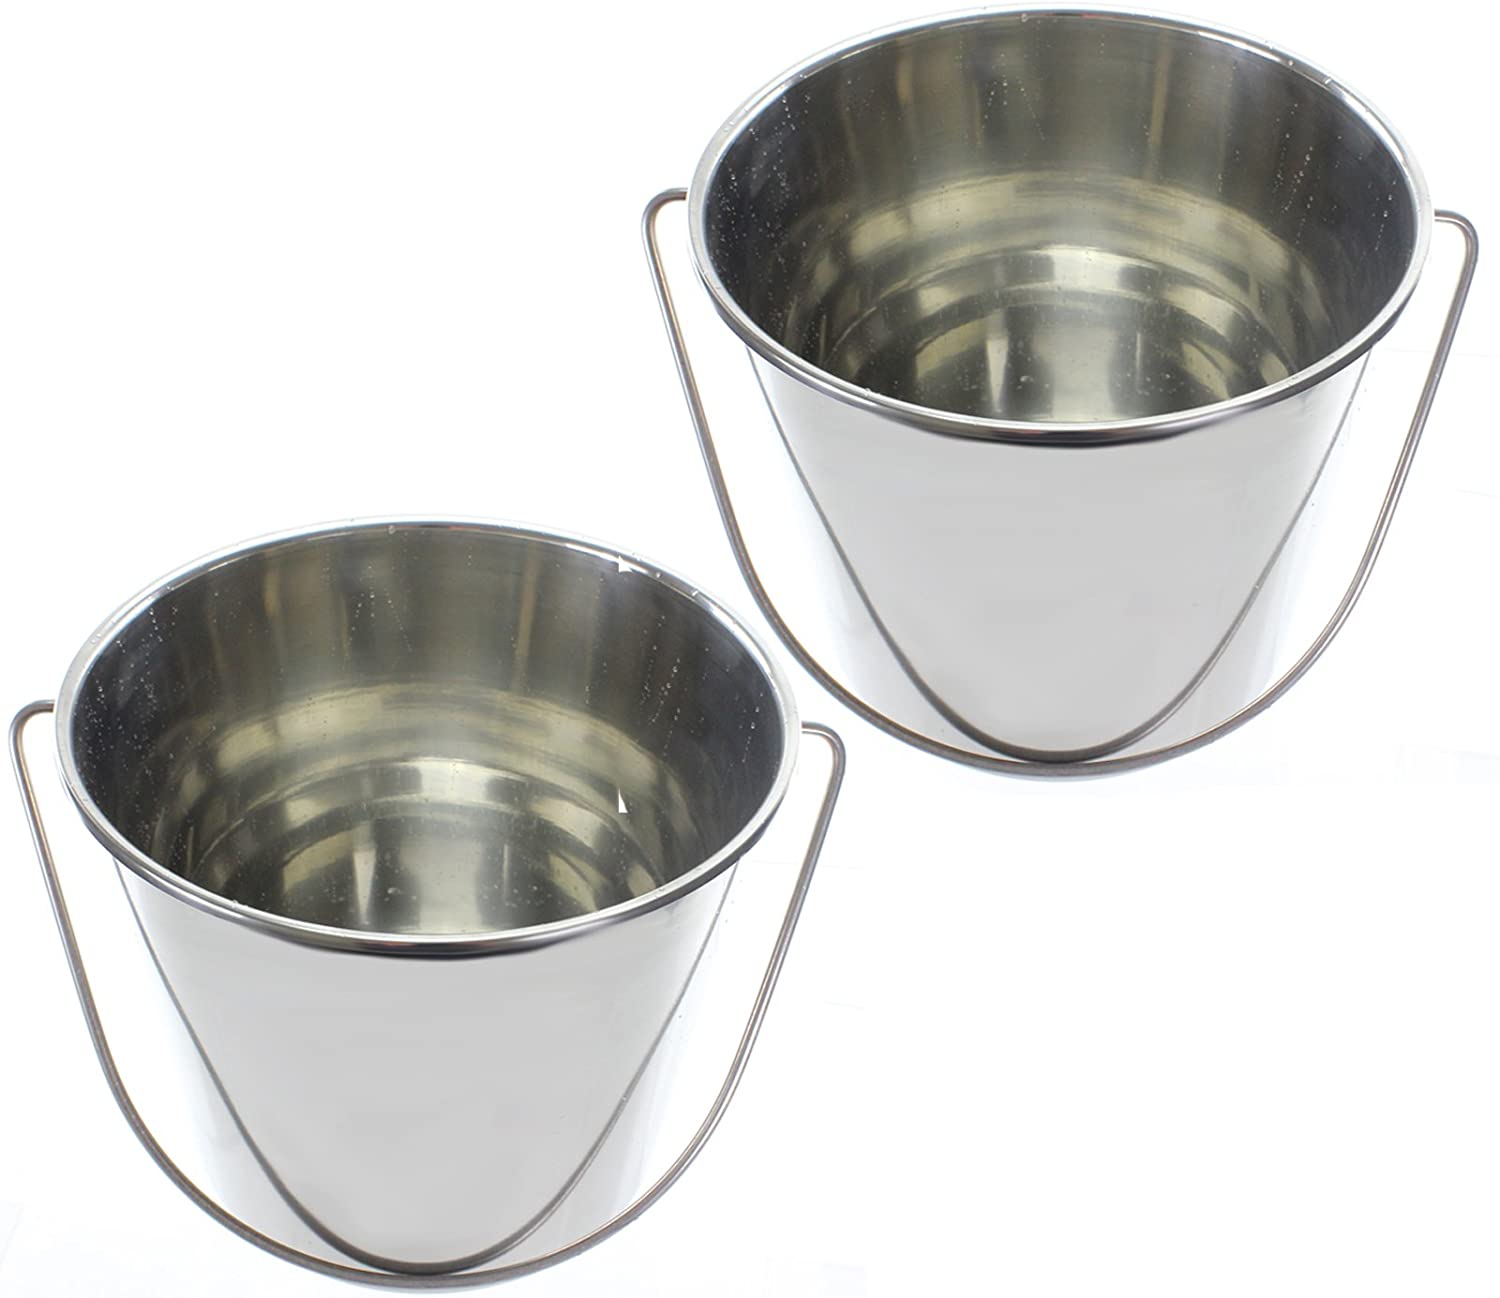 Stainless Steel Bucket Pack of 2 Buckets